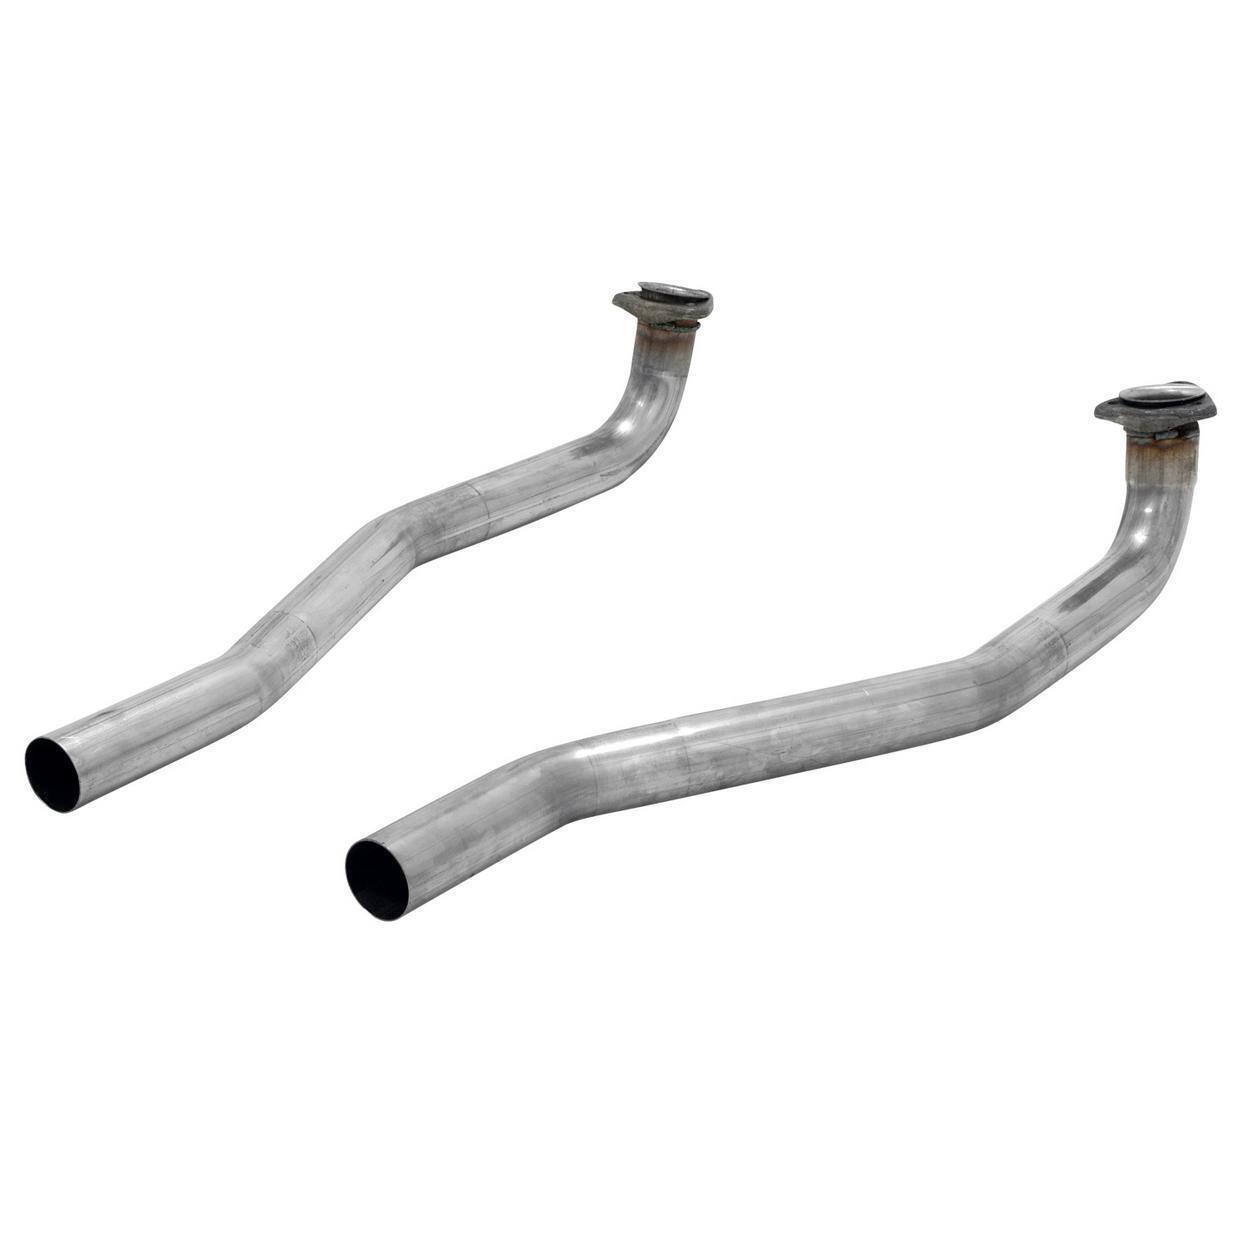 Flowmaster Exhaust Pipe - Fits 65-67 Chevrolet Bel Air; Biscayne; Caprice and Im